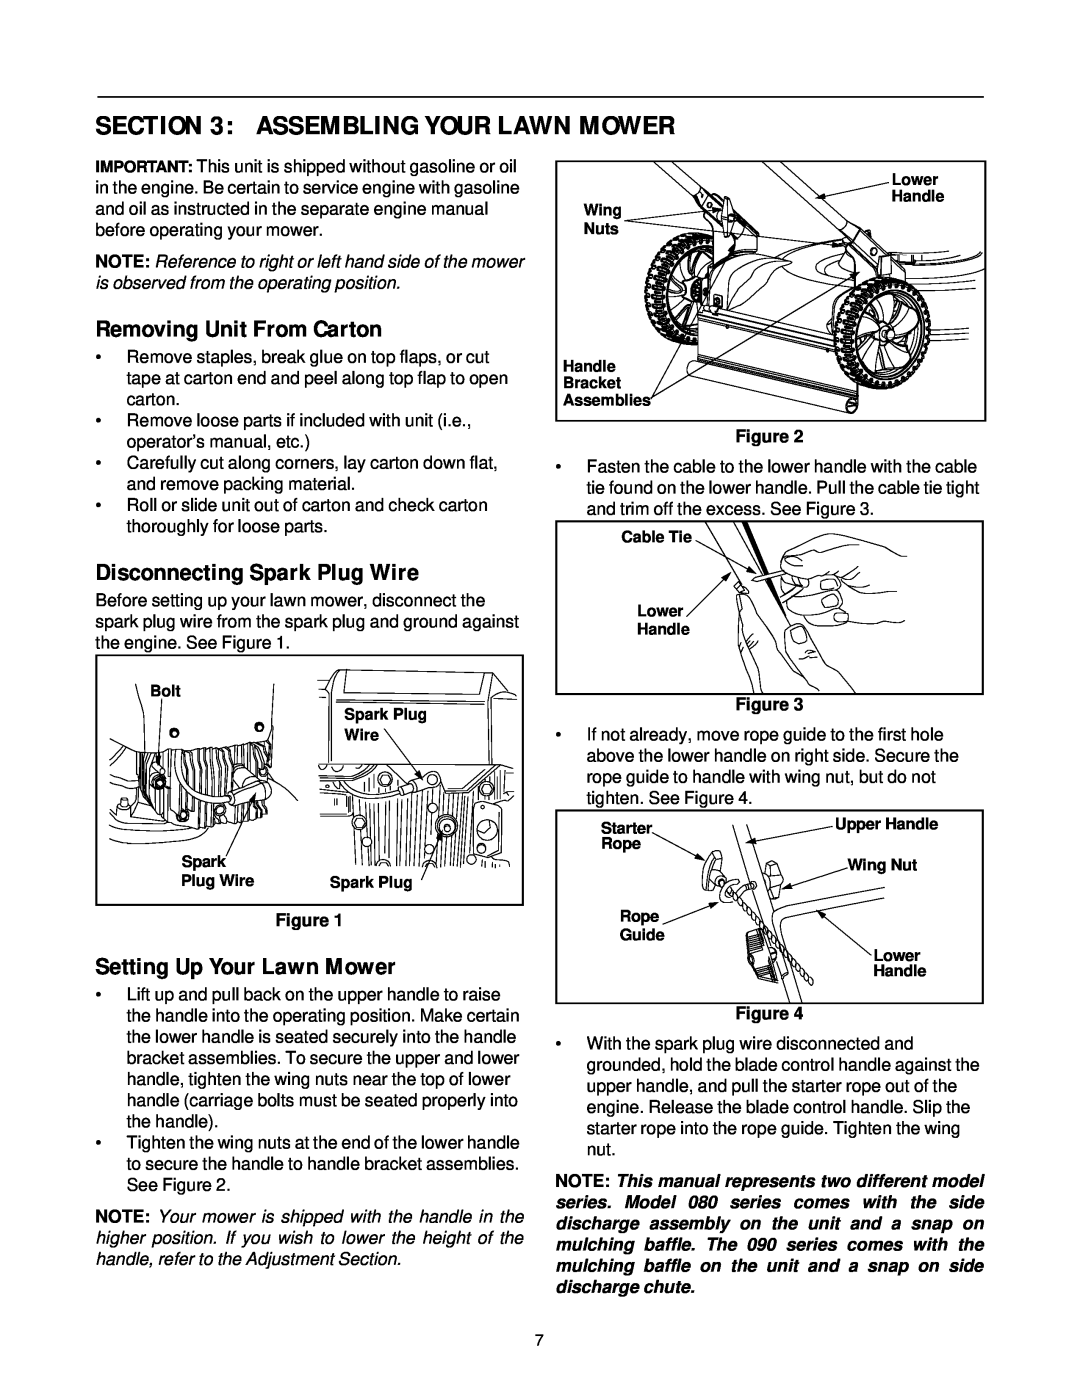 MTD 080 Thru 099 manual Assembling Your Lawn Mower, Removing Unit From Carton, Disconnecting Spark Plug Wire 